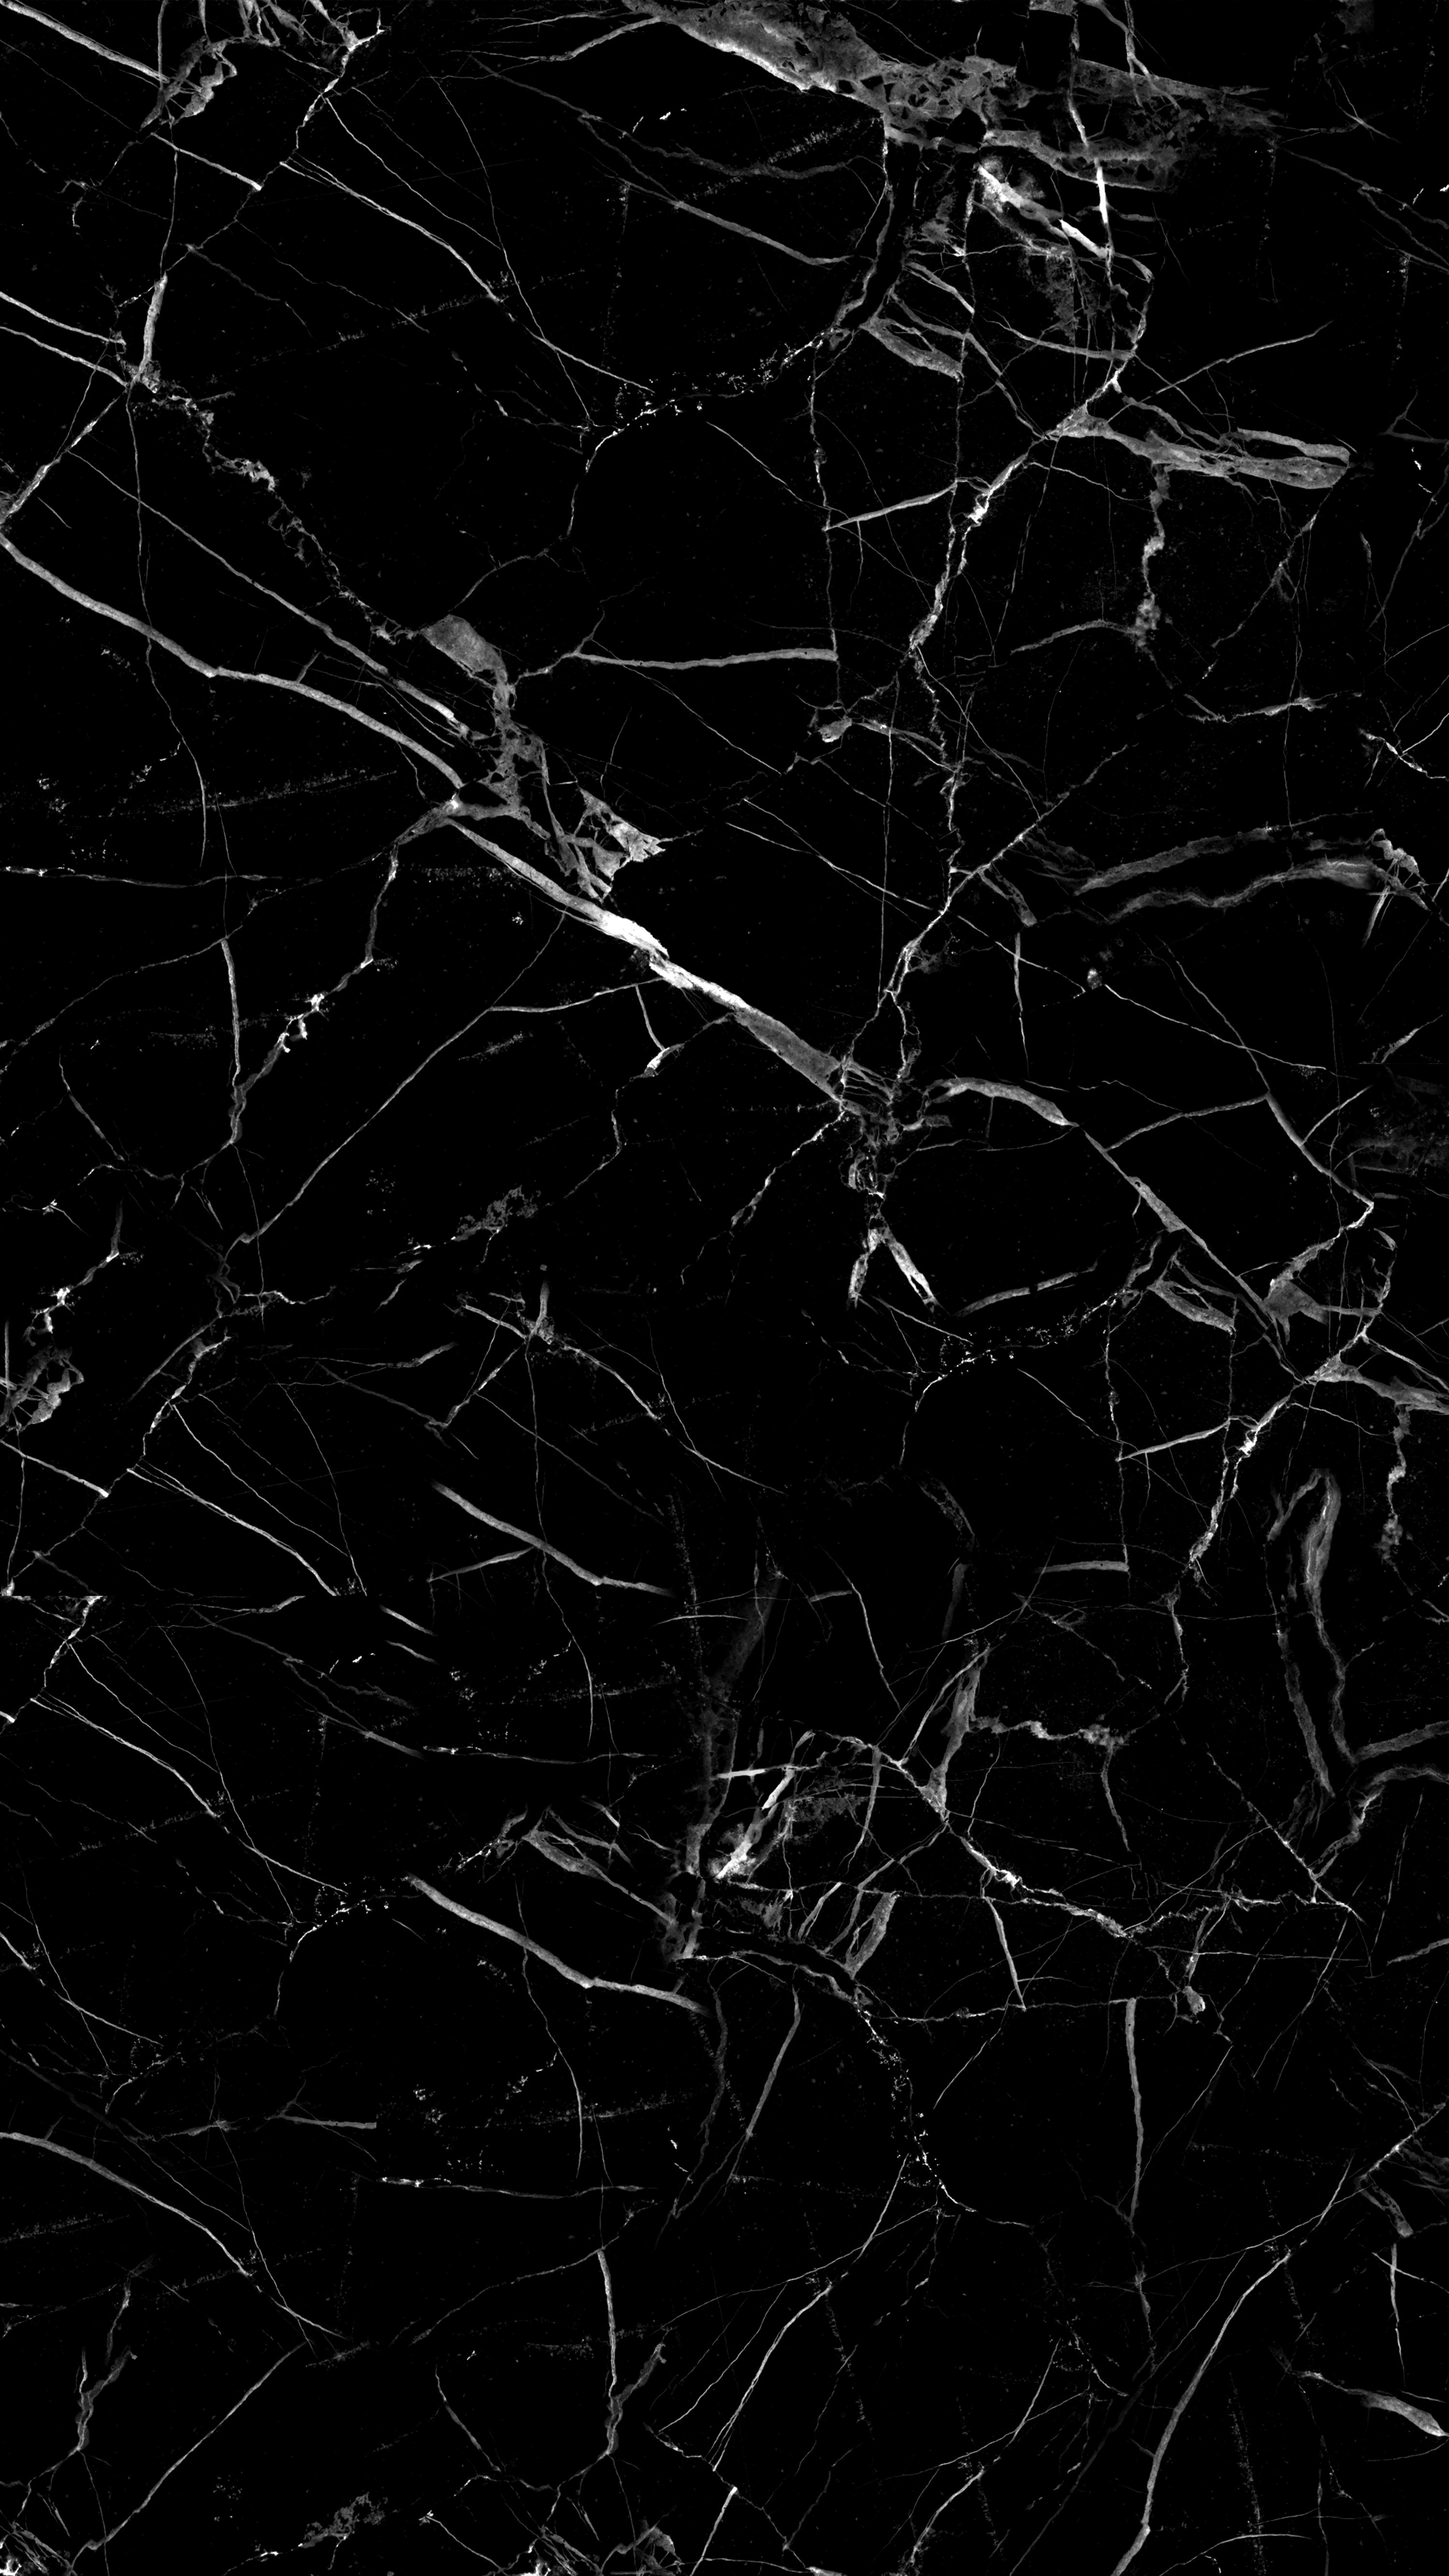 152568 Screensavers and Wallpapers Smithereens for phone. Download cracks, dark, texture, textures, crack, shards, smithereens pictures for free